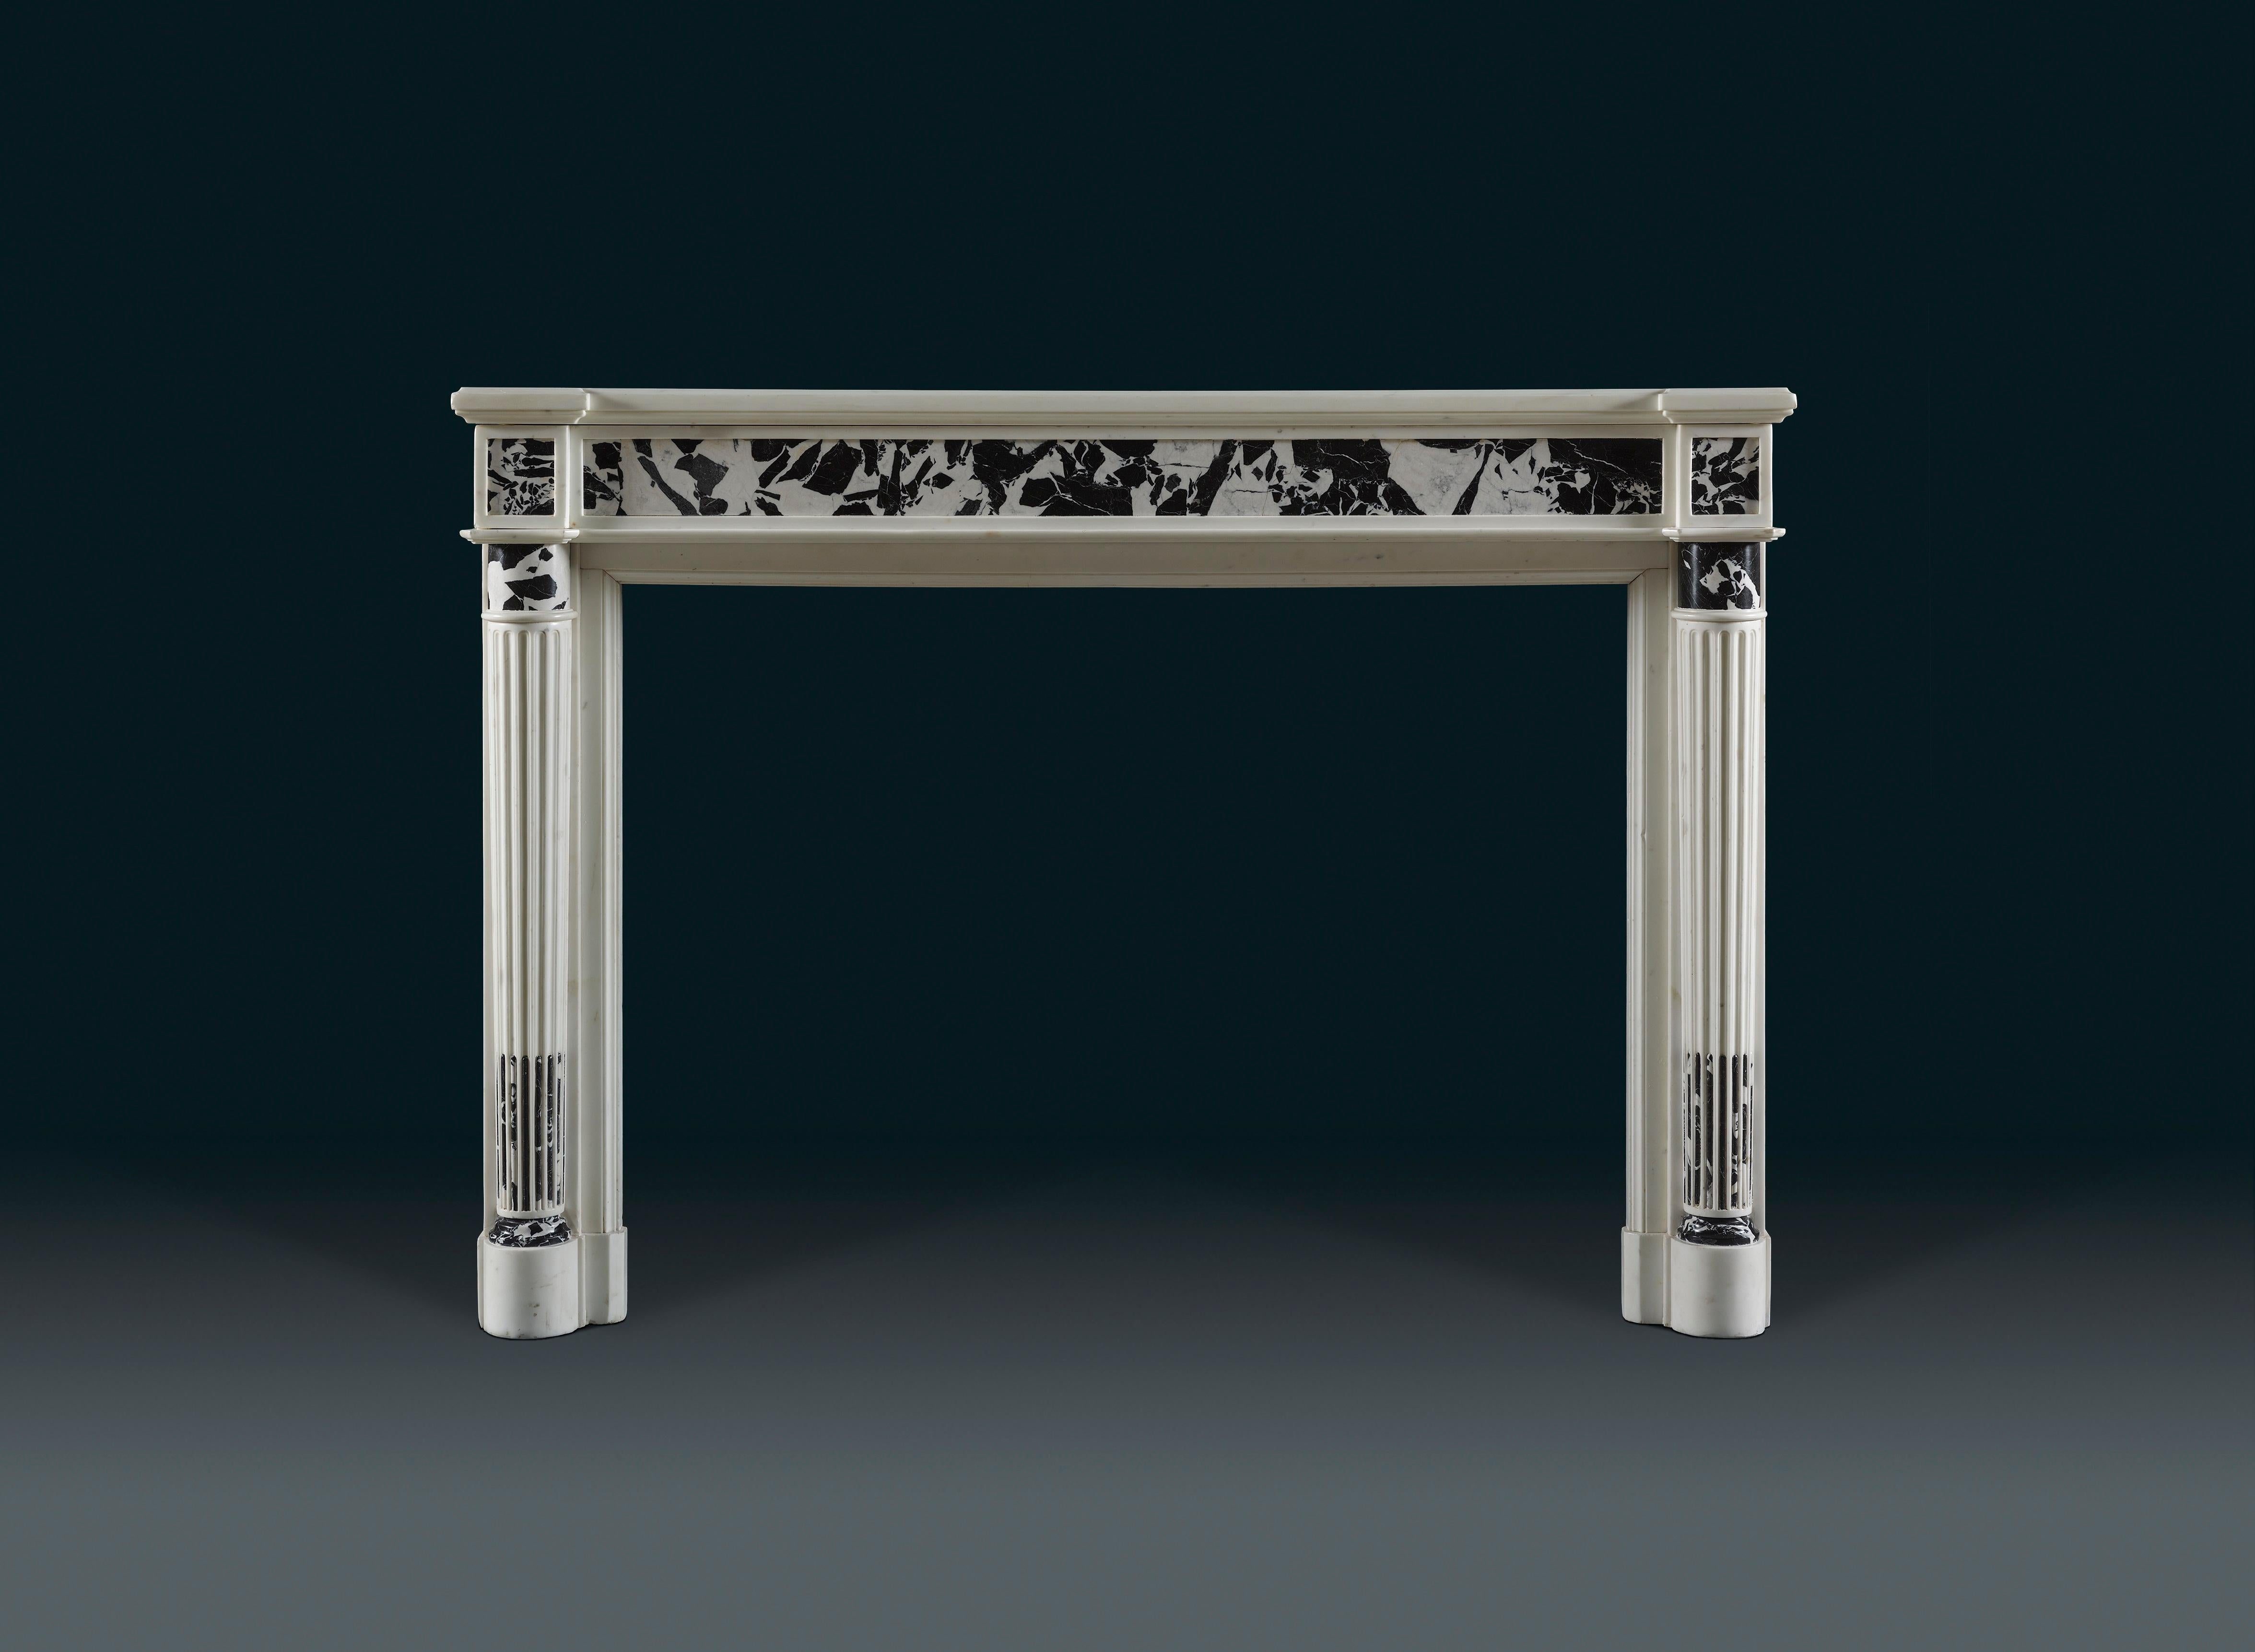 Of typical rectangular form, of statuary and black and white 'Grande Antique' marble.

The oblong moulded shelf protruding over the jamb blockings, the frieze with a well figured inlaid panel of Grande Antique flanked by the protruding blockings